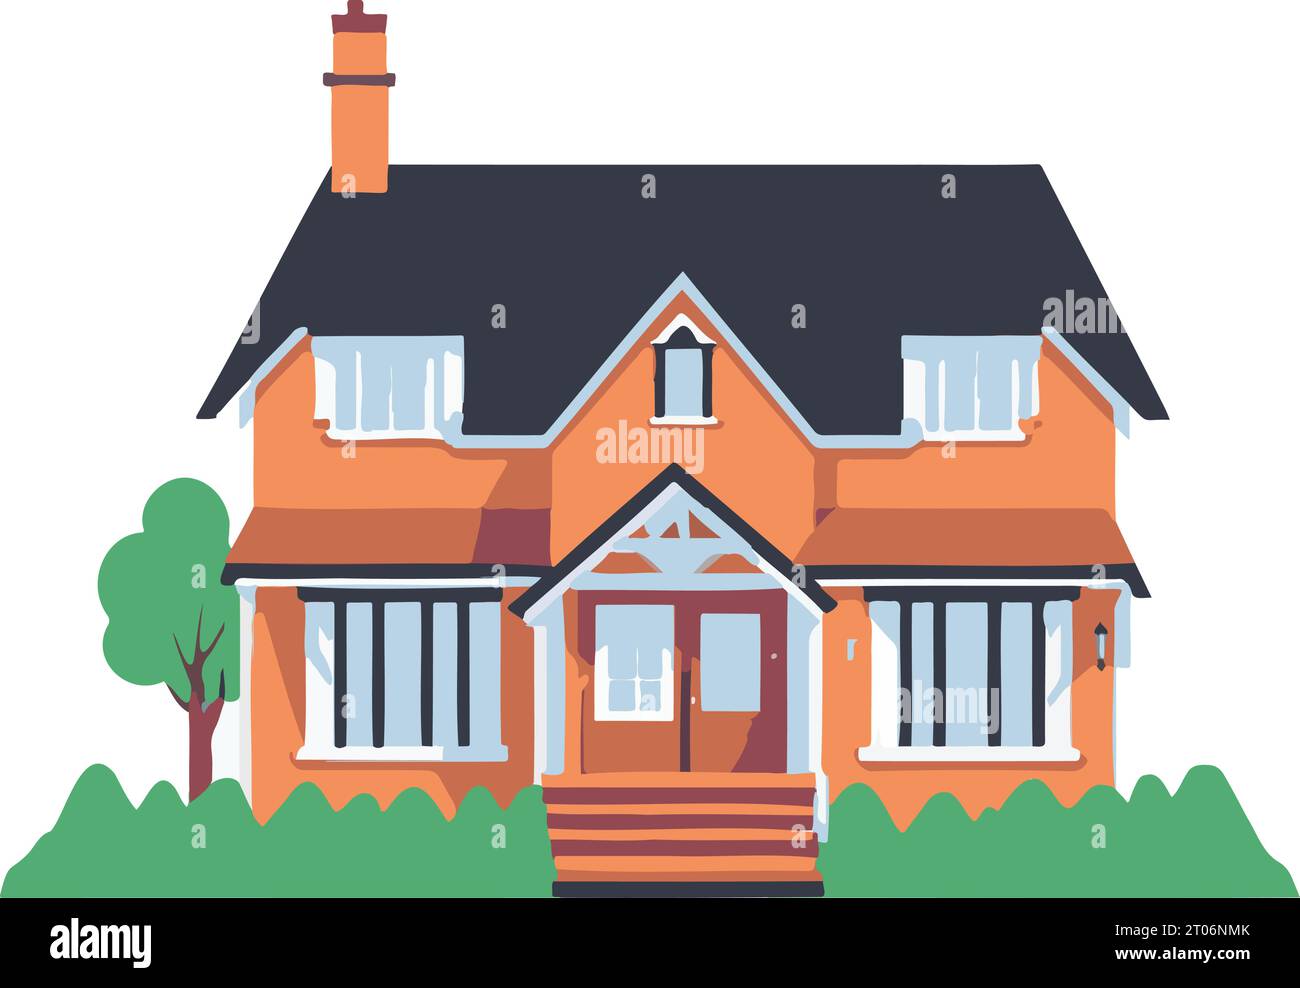 House Illustration High Quality Vector Format Stock Vector